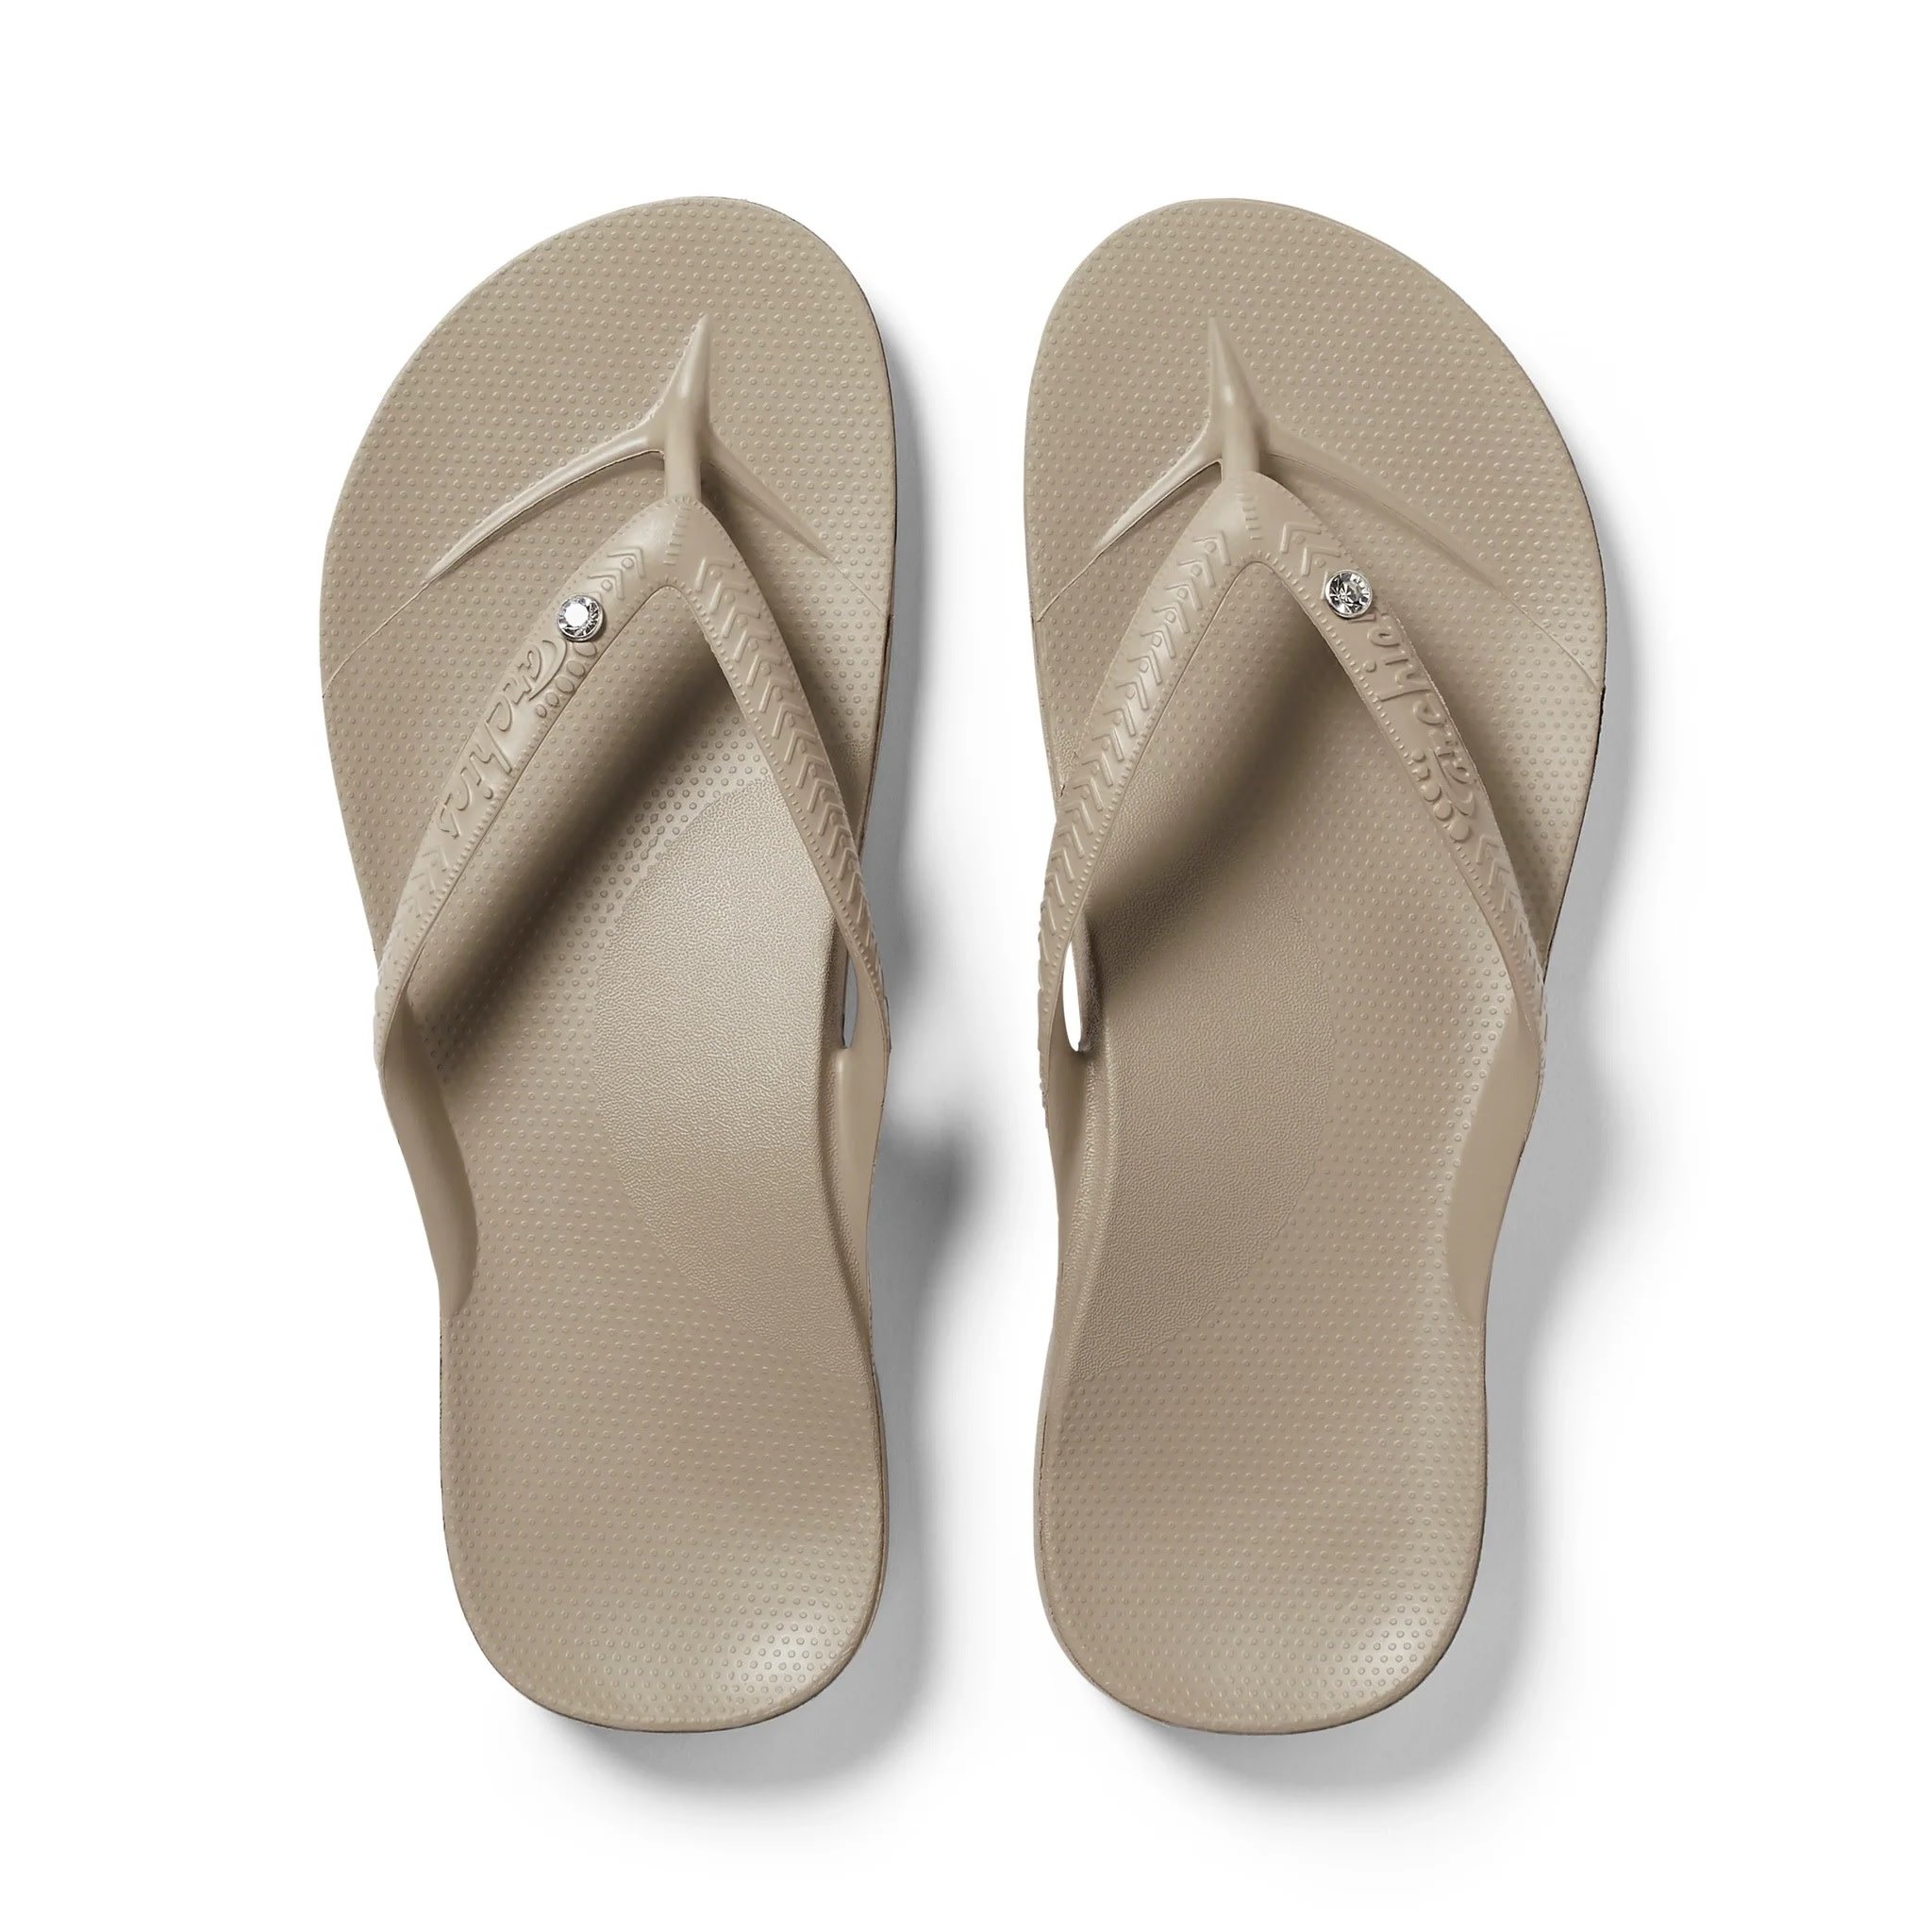 Archies | Arch Support Flip Flop Crystal Taupe